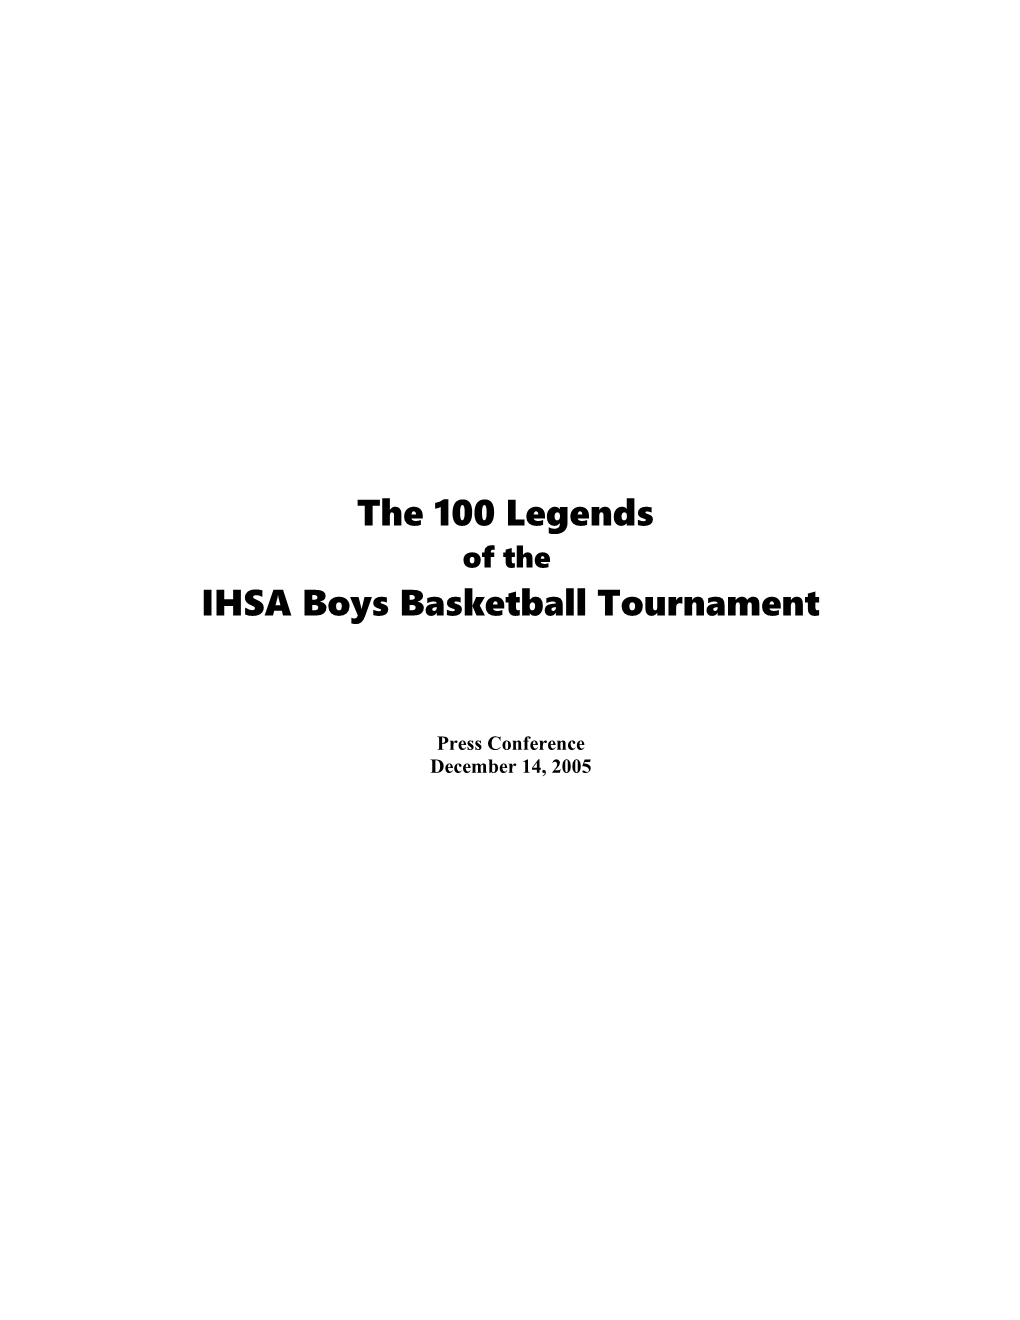 Nominees for IHSA's 100 Legends From